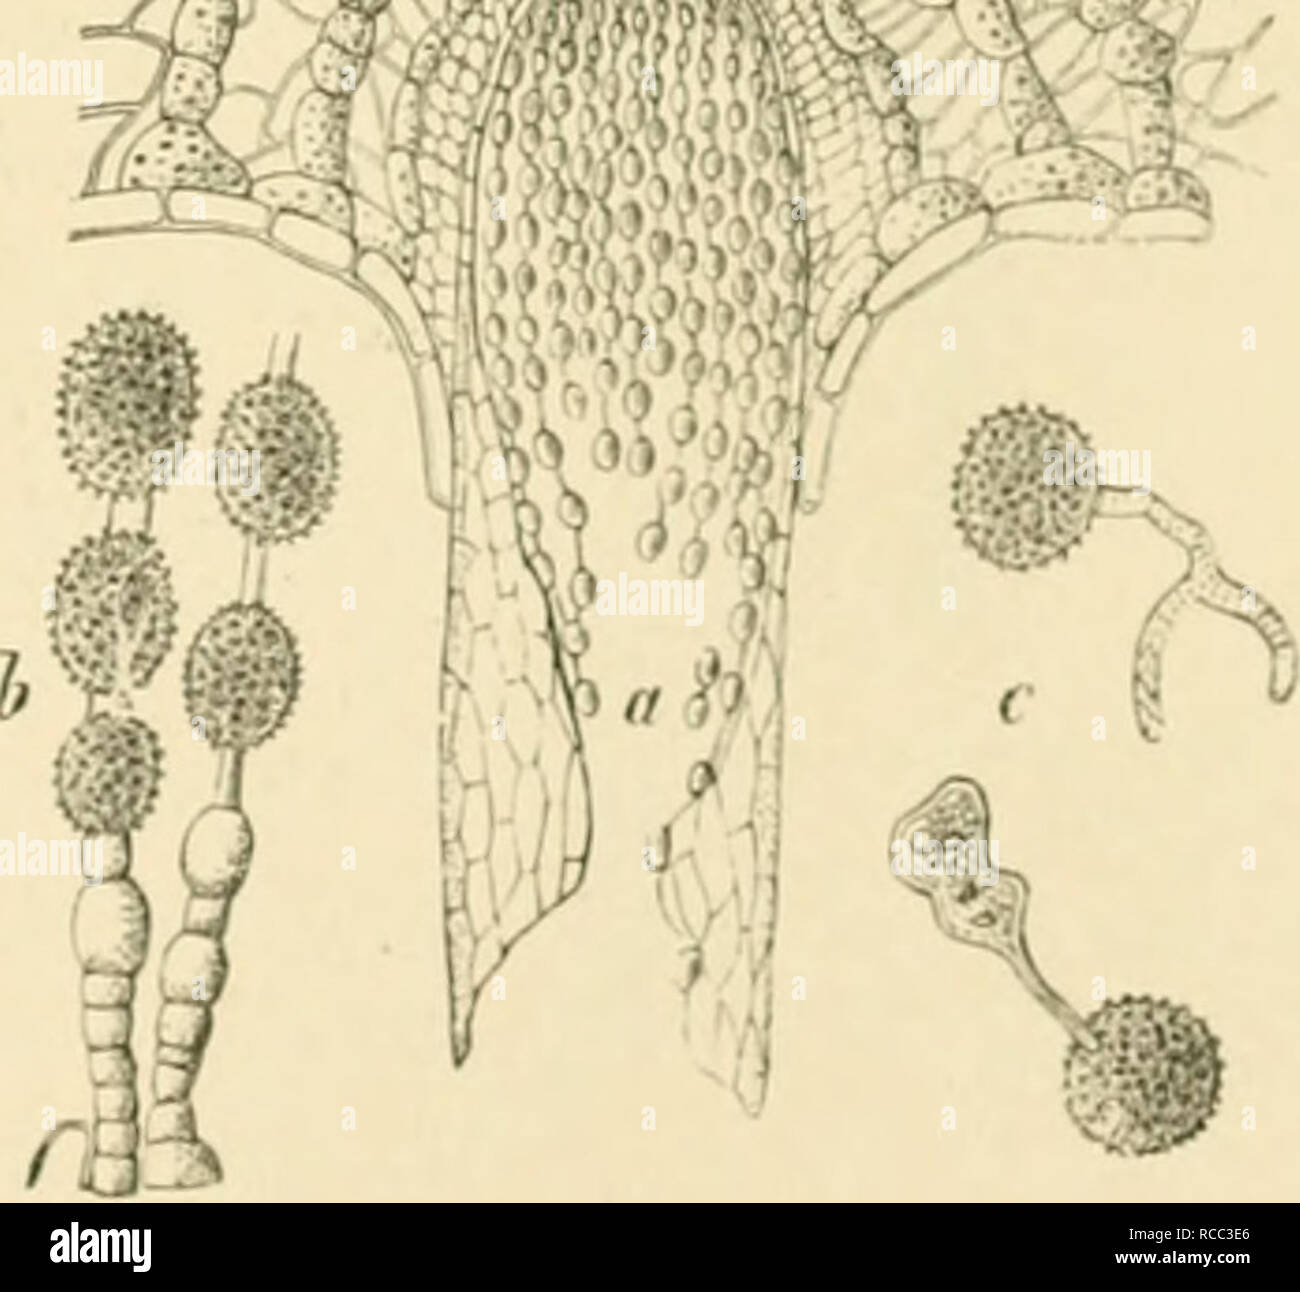 . Diseases of plants induced by cryptogamic parasites; introduction to the study of pathogenic Fungi, slime-Fungi, bacteria, &amp; Algae. Plant diseases; Parasitic plants; Fungi. Fio. 205.—CulypiOKpora OoipiKAiano. Aecidia on the under surface of needles of Silver Fir. (v. Tubeuf del.) &quot;m^^w^. Fici. 206.—Aecidium in a needle of Silver Fir (much enUirged). b. Series of aecidiospores and intermediate celLs. c Germinating aecidiospores. (After R. Hartig.) Tliis aecidium is also found on Ahys cvphalonicfi in U])per Bavaria. Barclayella deformans Diet.' This lias been found in the Himalaya rey Stock Photo